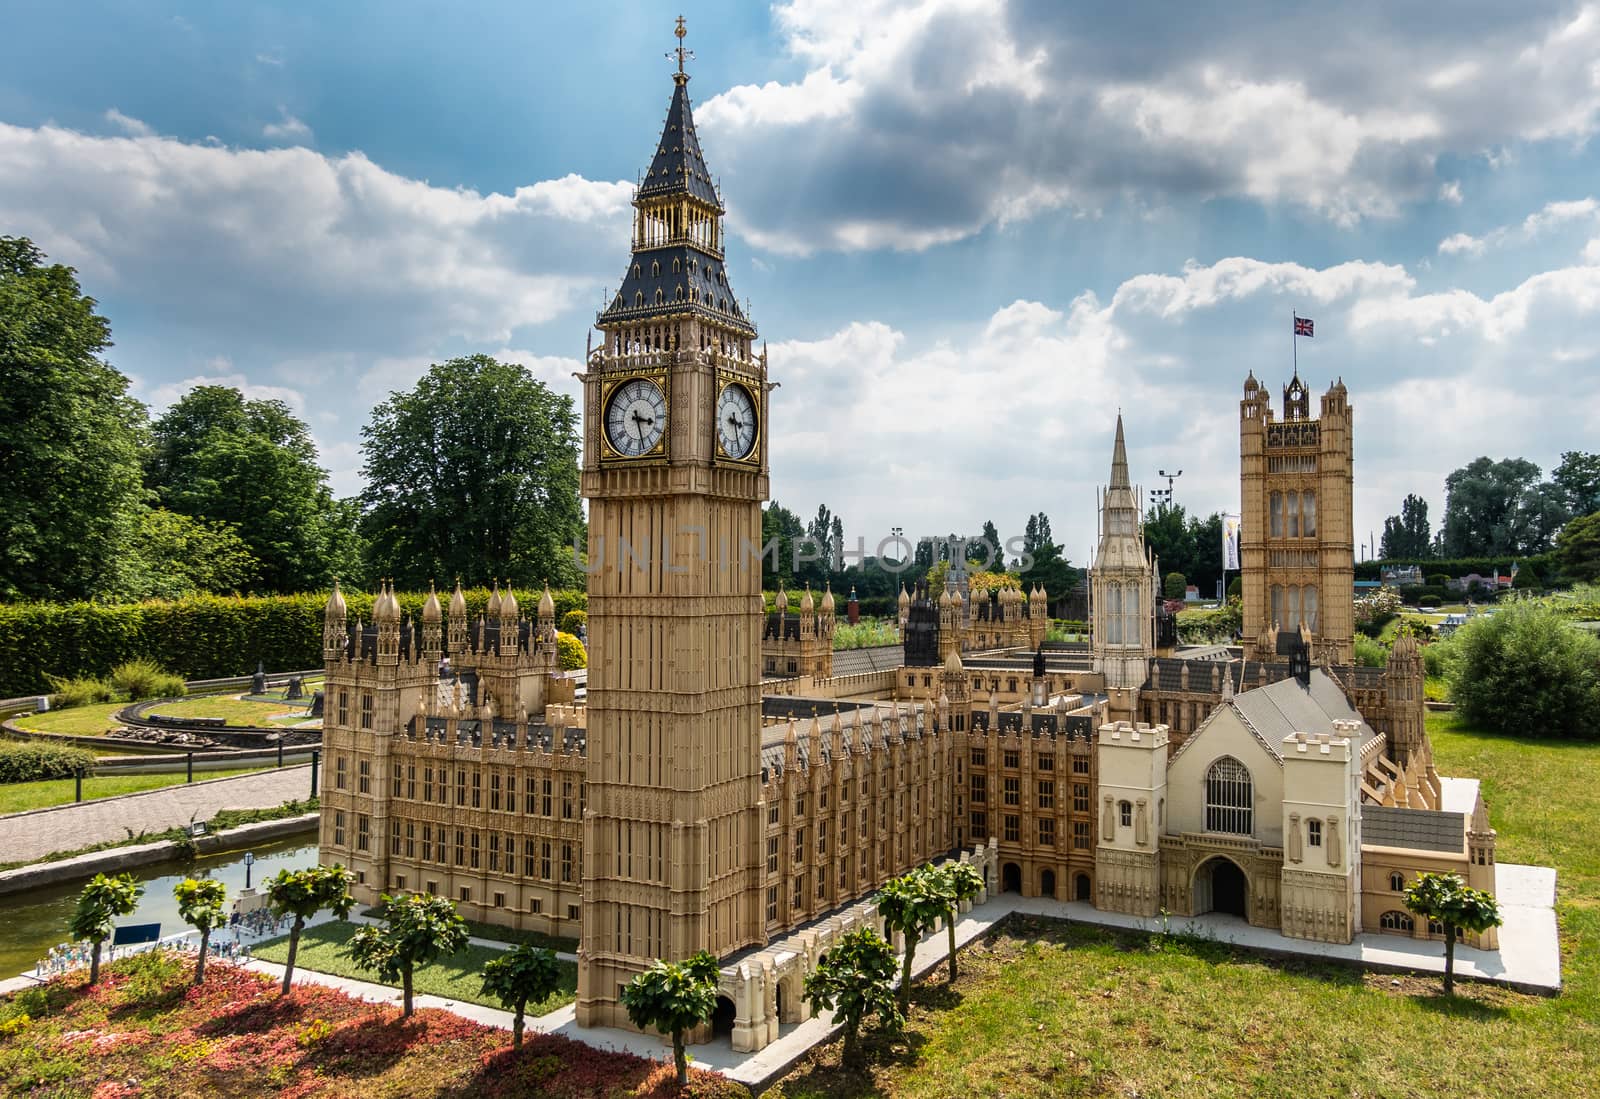 Brussels, Belgium - June 22, 2019: Mini-Europe exhibition park. London Big Ben clock tower and Parliament House built in miniature in park under blue sky with cloudscape and green foliage.